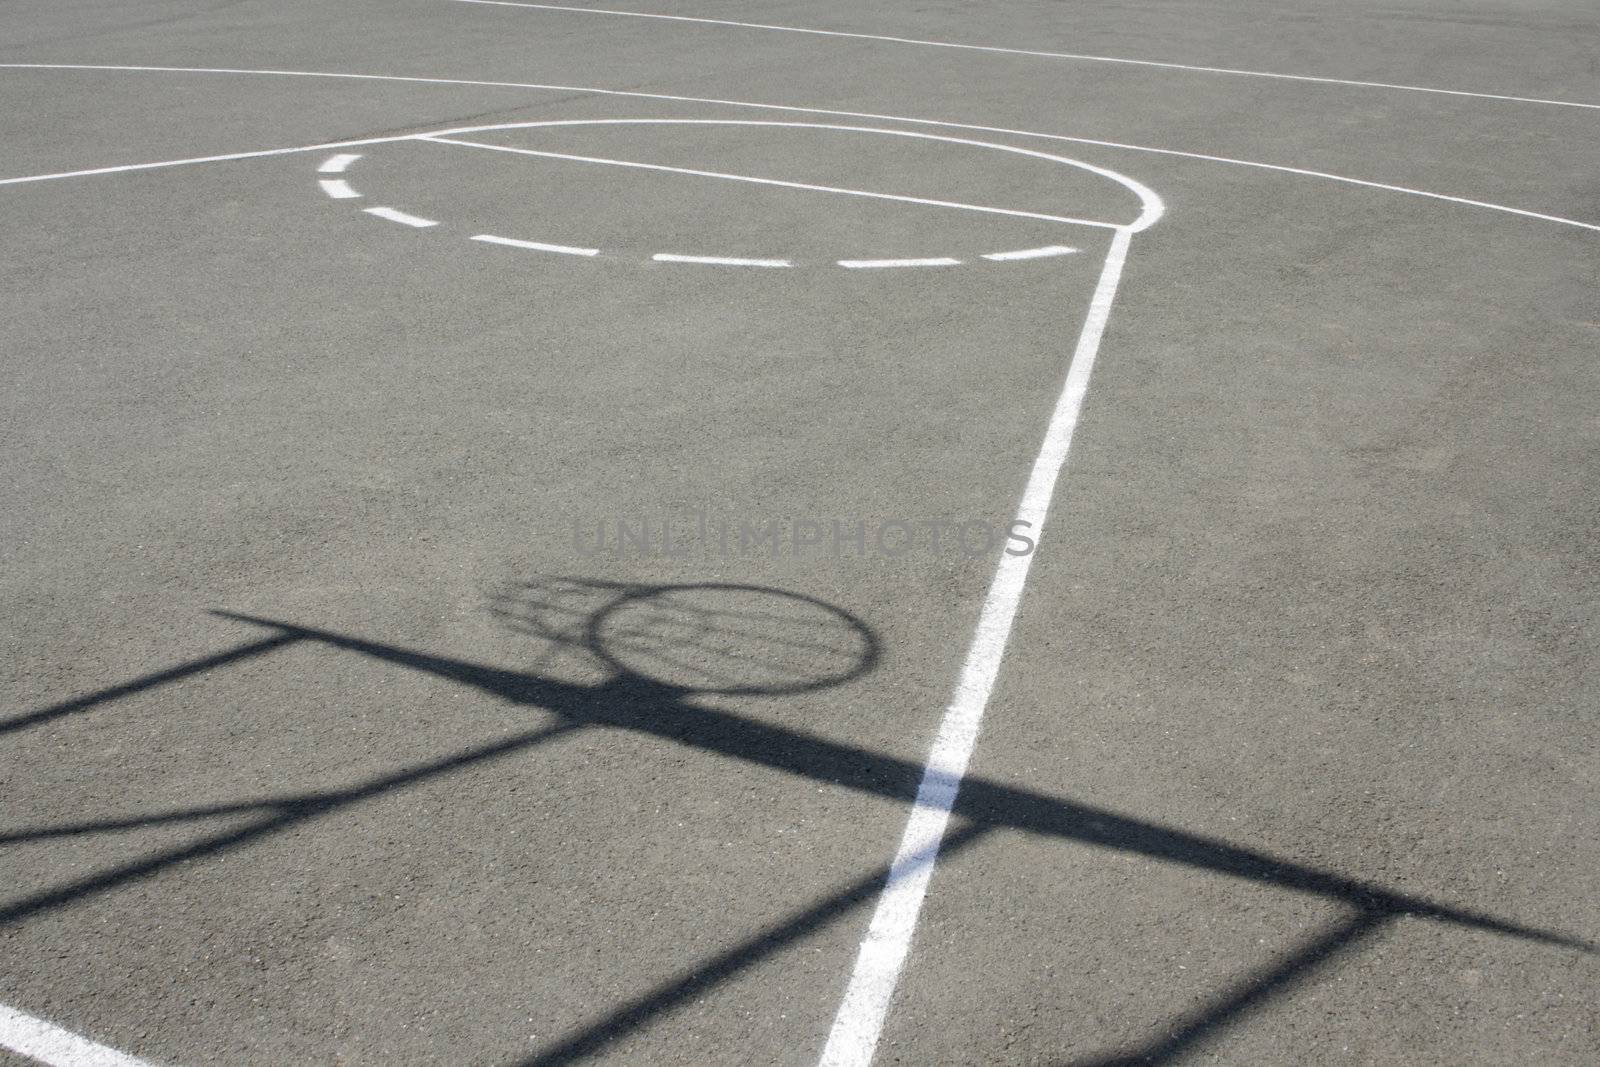 Basketball field on a playground - outdoor shot